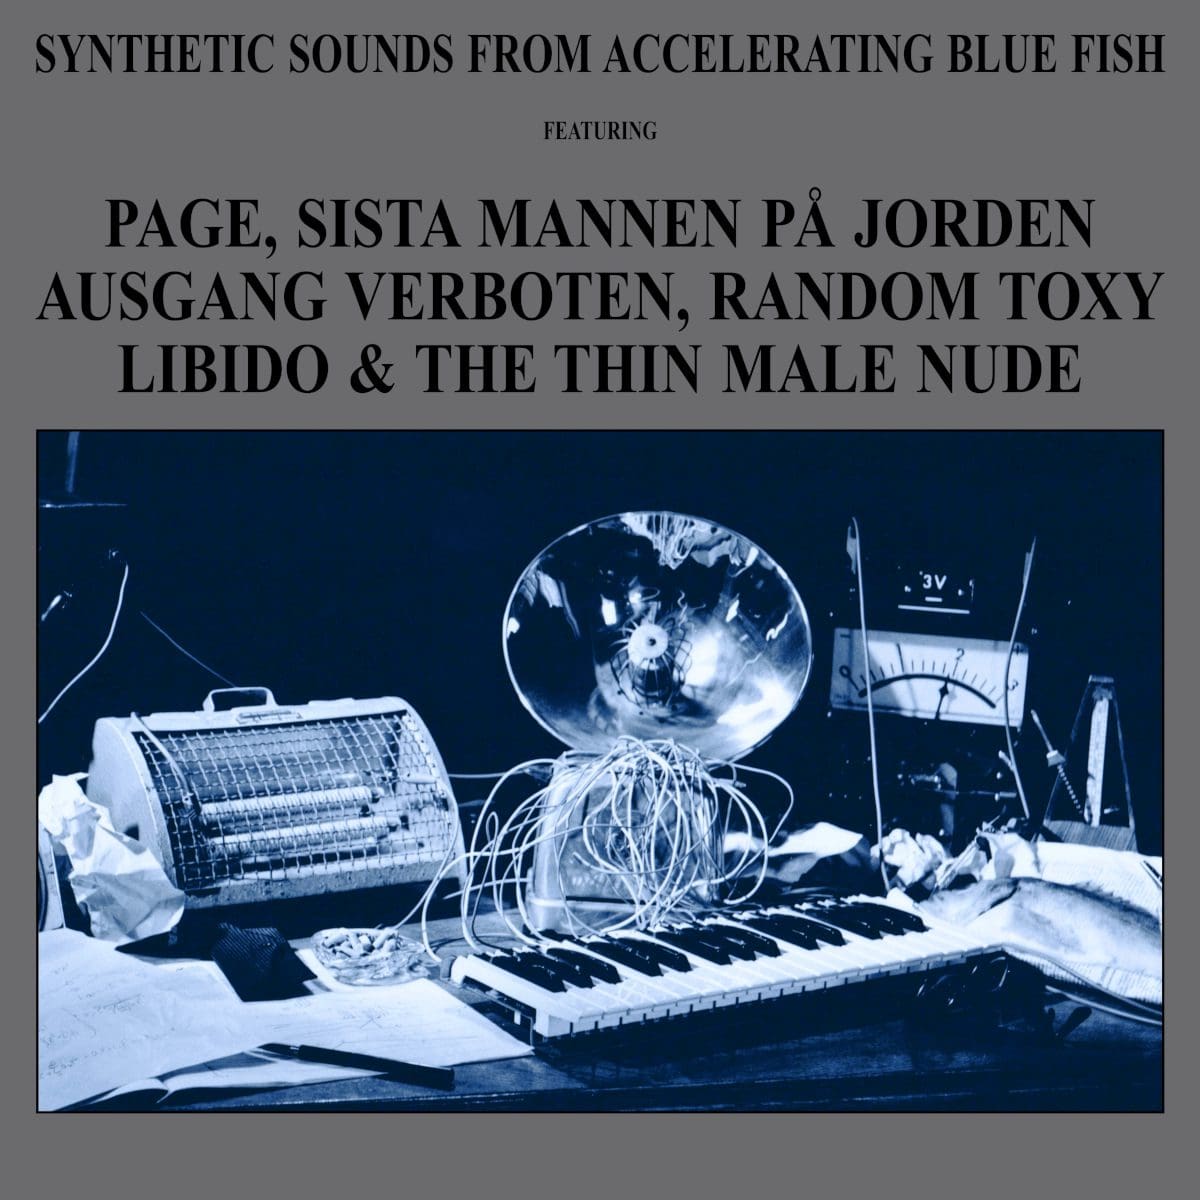 Early Swedish electronic pop compilation 'Synthetic Sounds From Accelerating Blue Fish' gets a digital release after 33 years